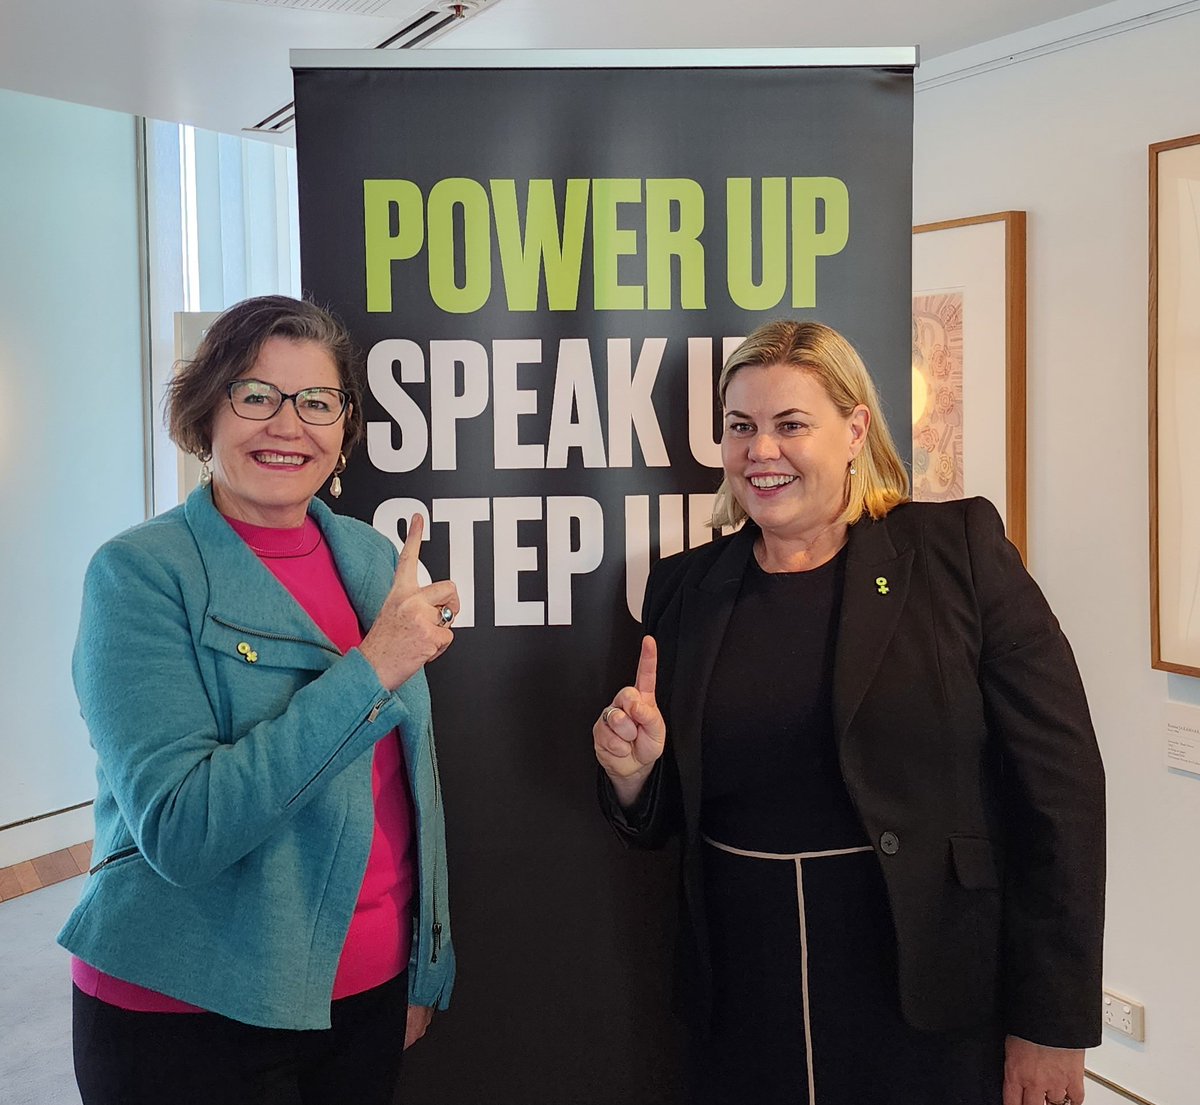 Proud partner of @WomenElectionOz at todays national launch of the #WomenInPublicOffice program. 
This program builds on all the work I've done with WFE's CEO @LiciaHeath, over the past 4 years to train and EQUIP women & NB candidates to #GETELECTED. It's going to be HUGE!